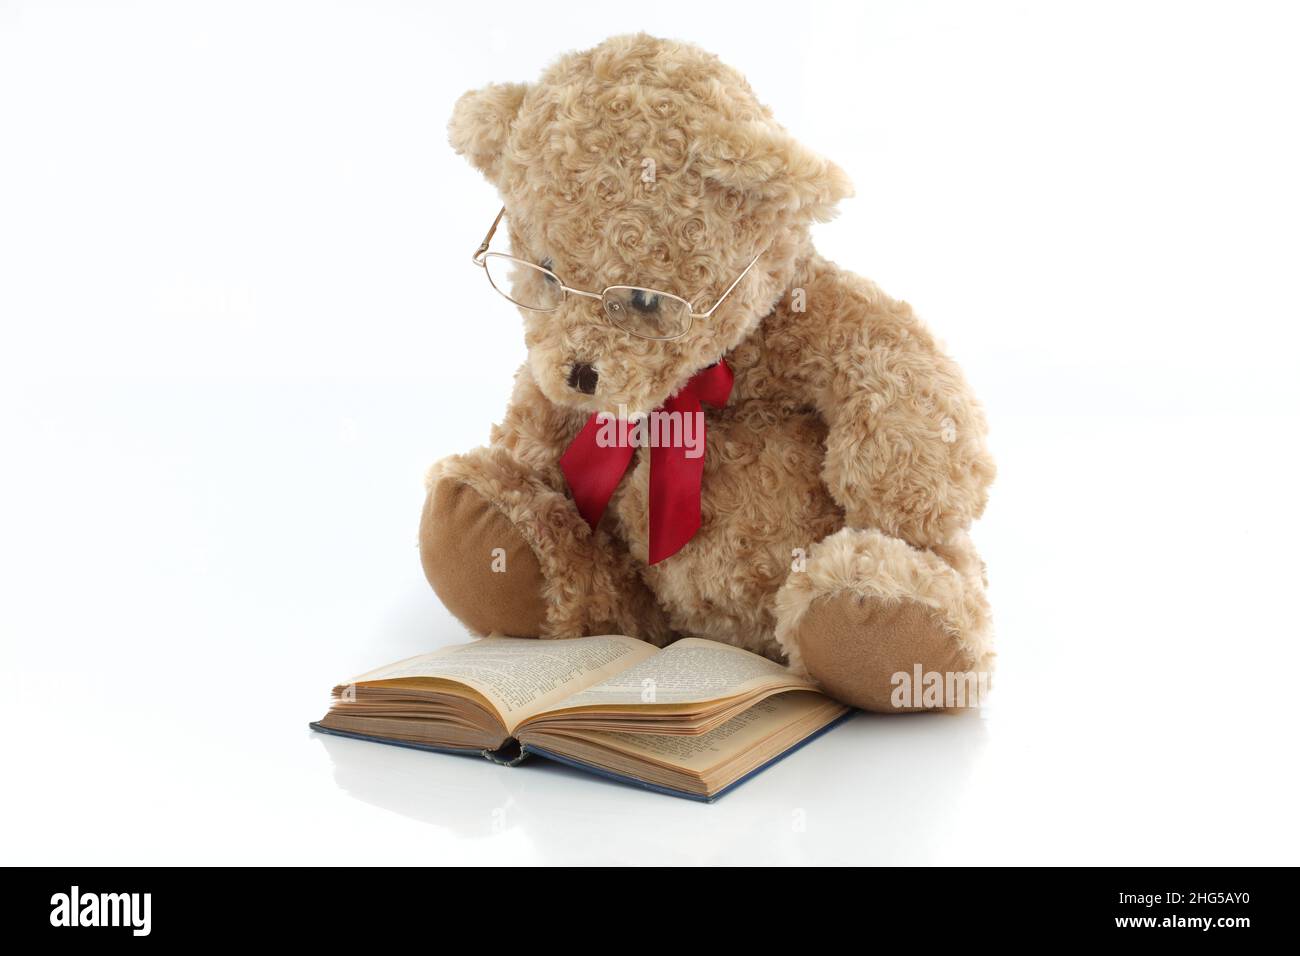 Teddy bear with glasses reading a book Stock Photo